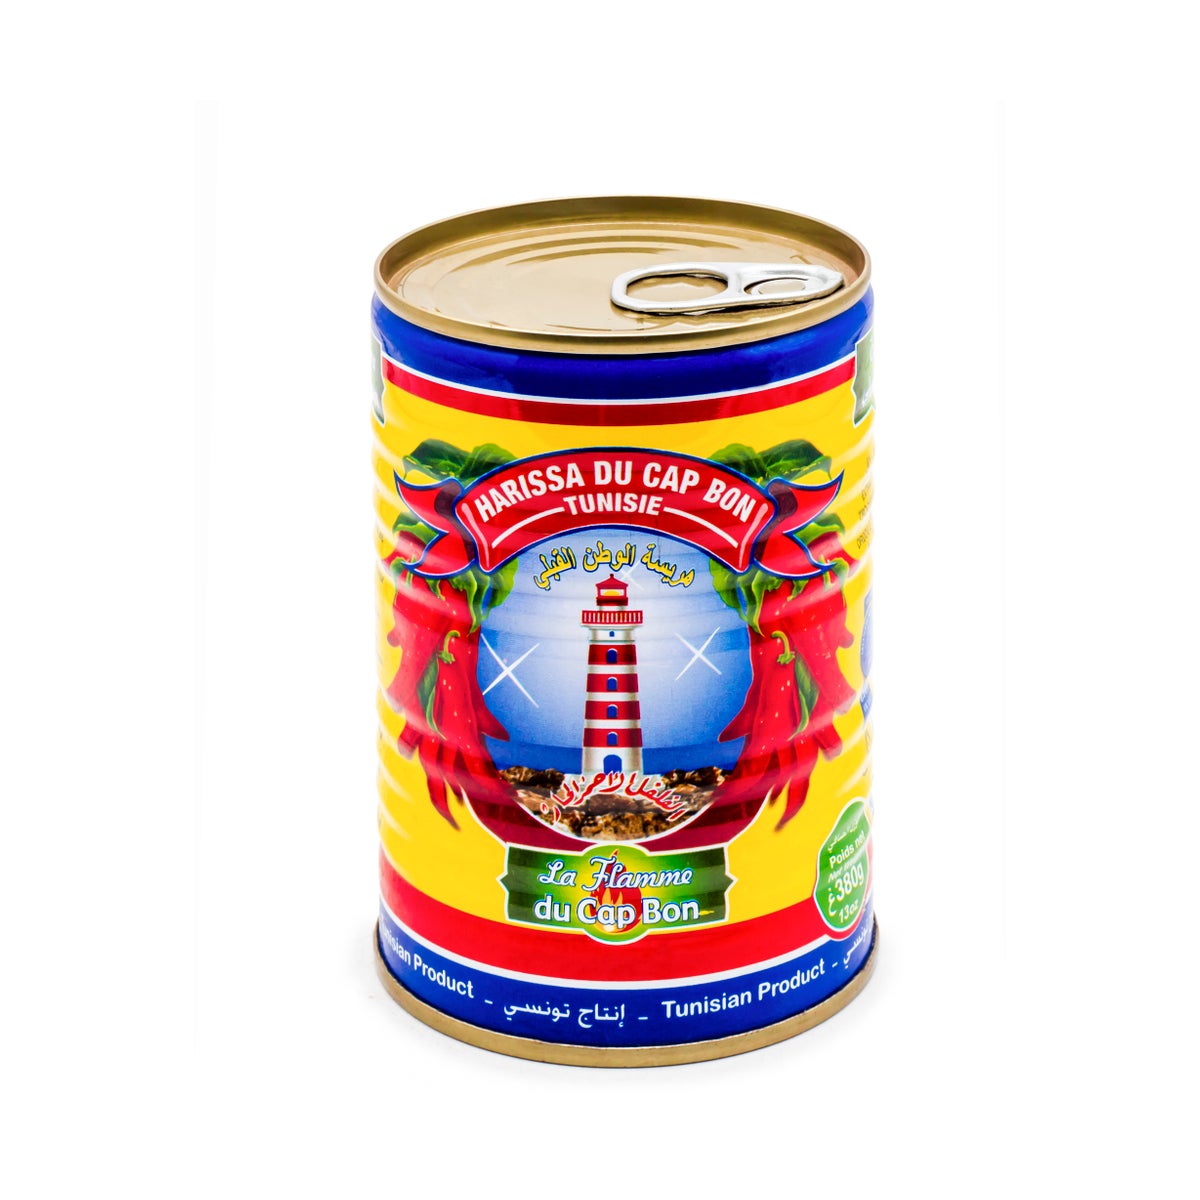 Harissa Hot Sauce in cans "La Flamme" 380 g x 24